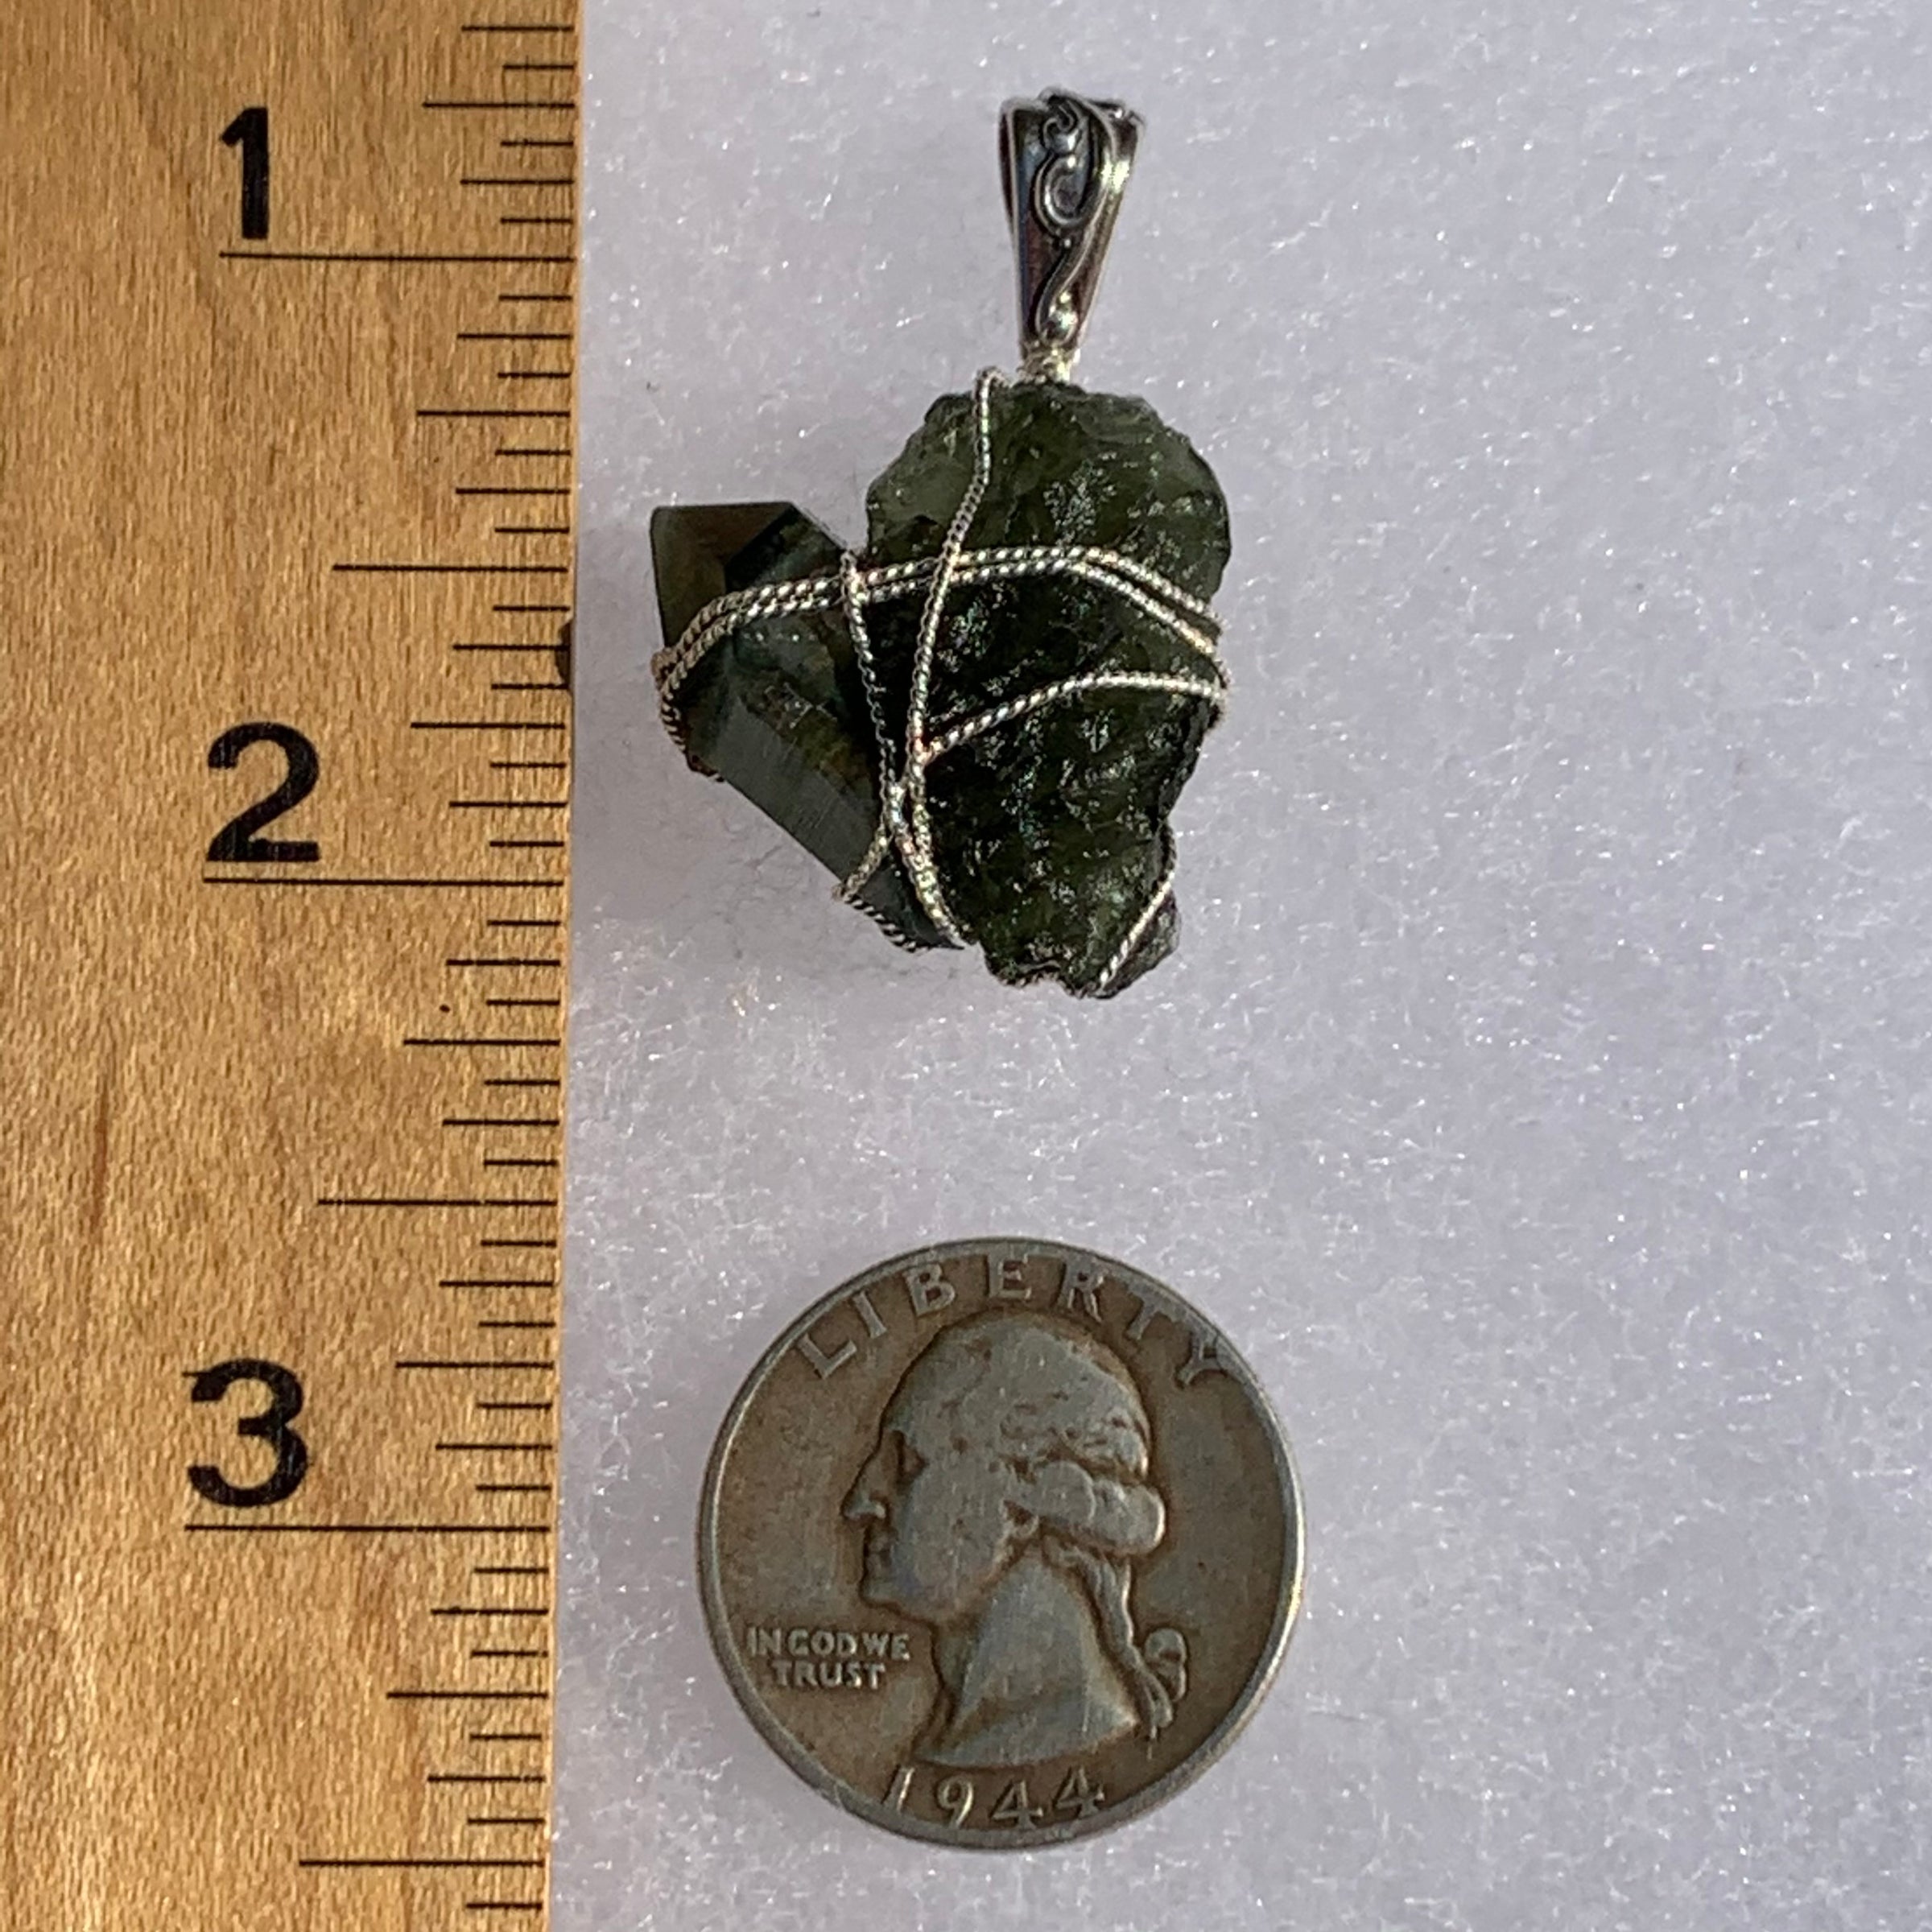 raw moldavite tektite and chlorite quartz crystal sterling silver wire wrapped pendant next to a ruler and US quarter for scale